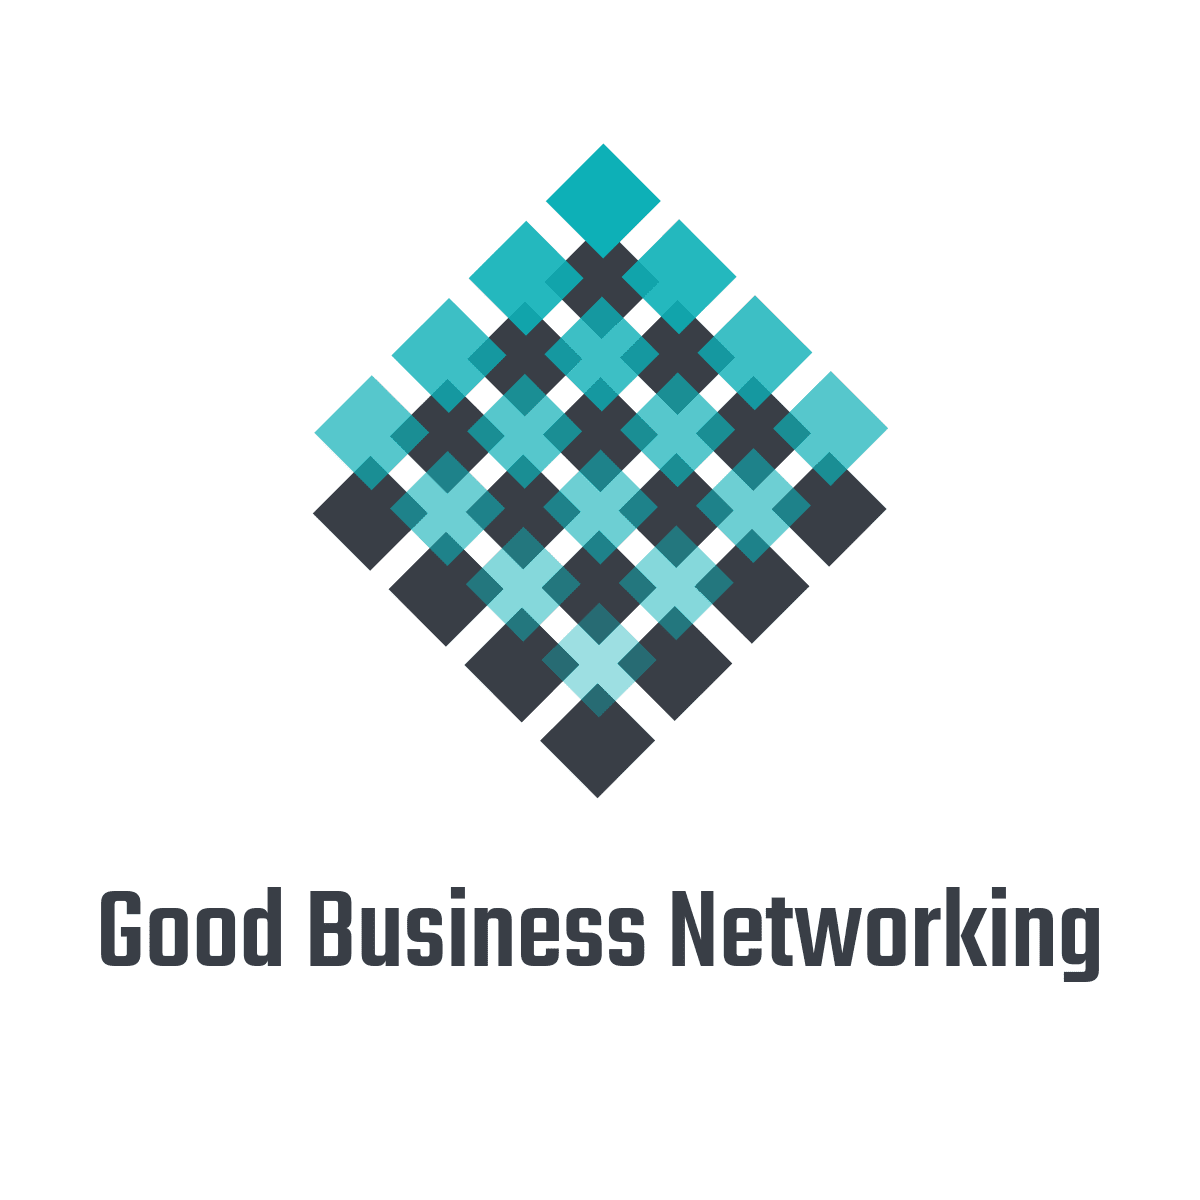 Good Business Networking